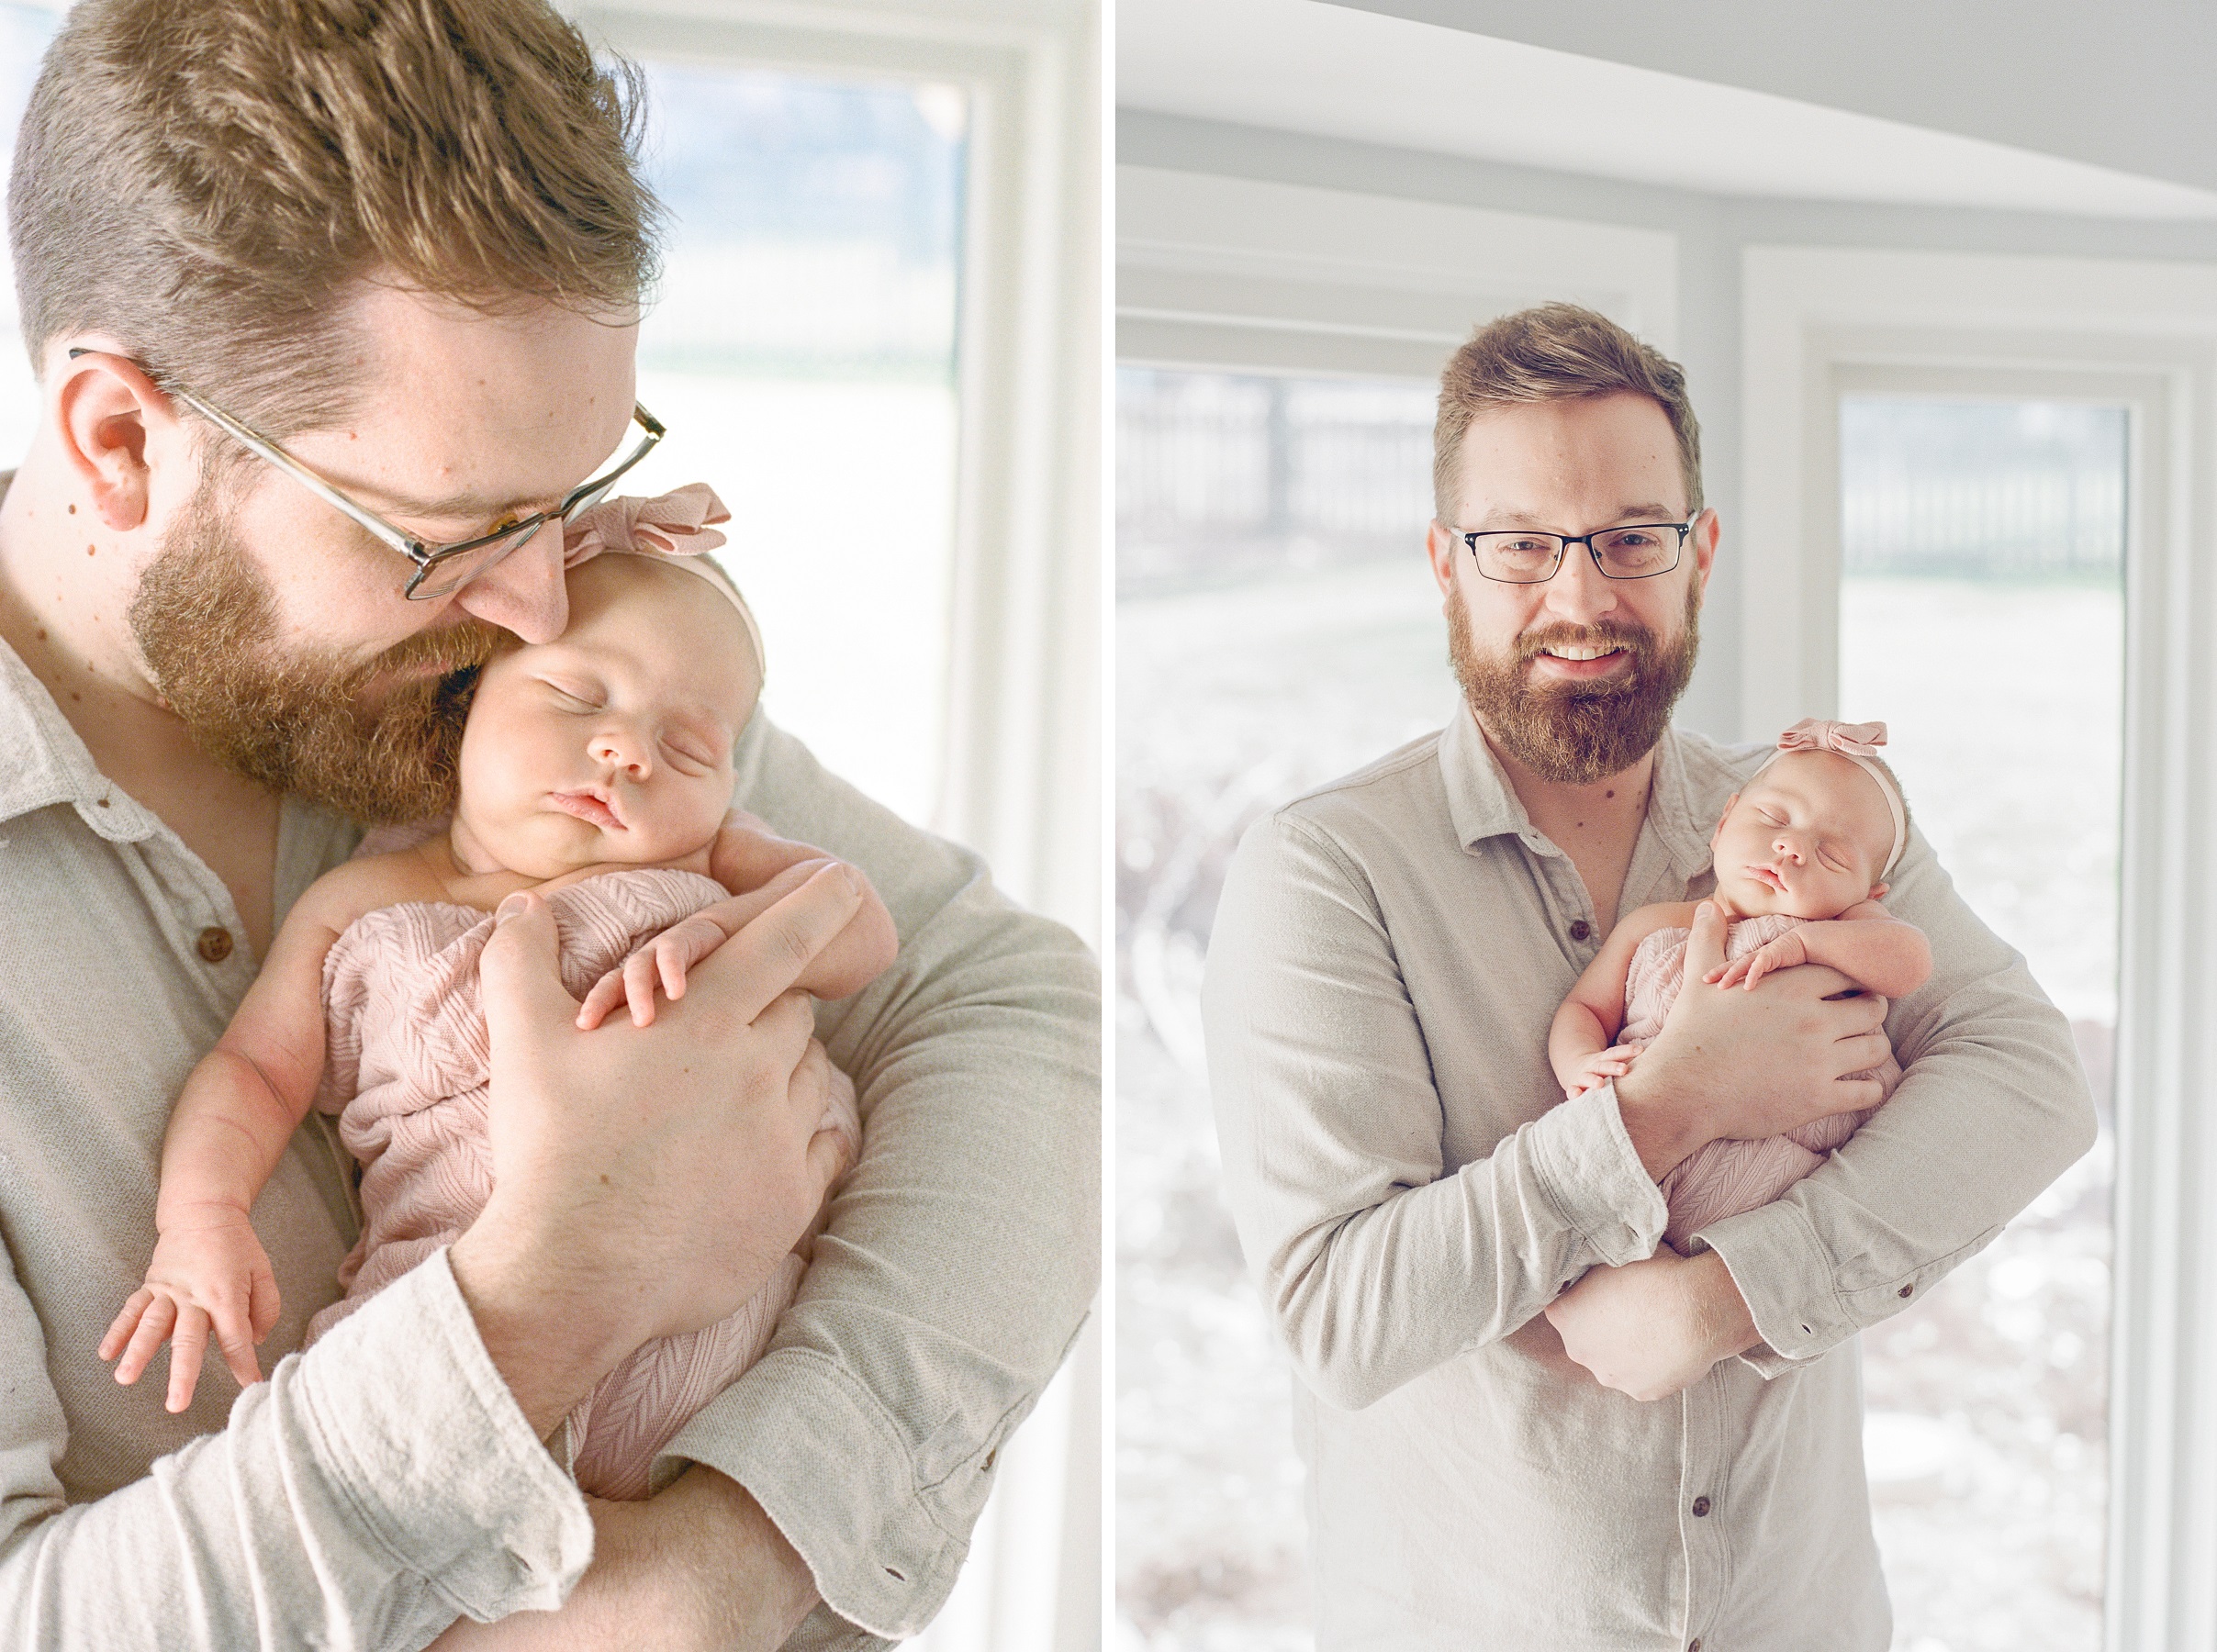 12 - Baby girl being held by dad at newborn session at home in January in Overland Park, Kansas